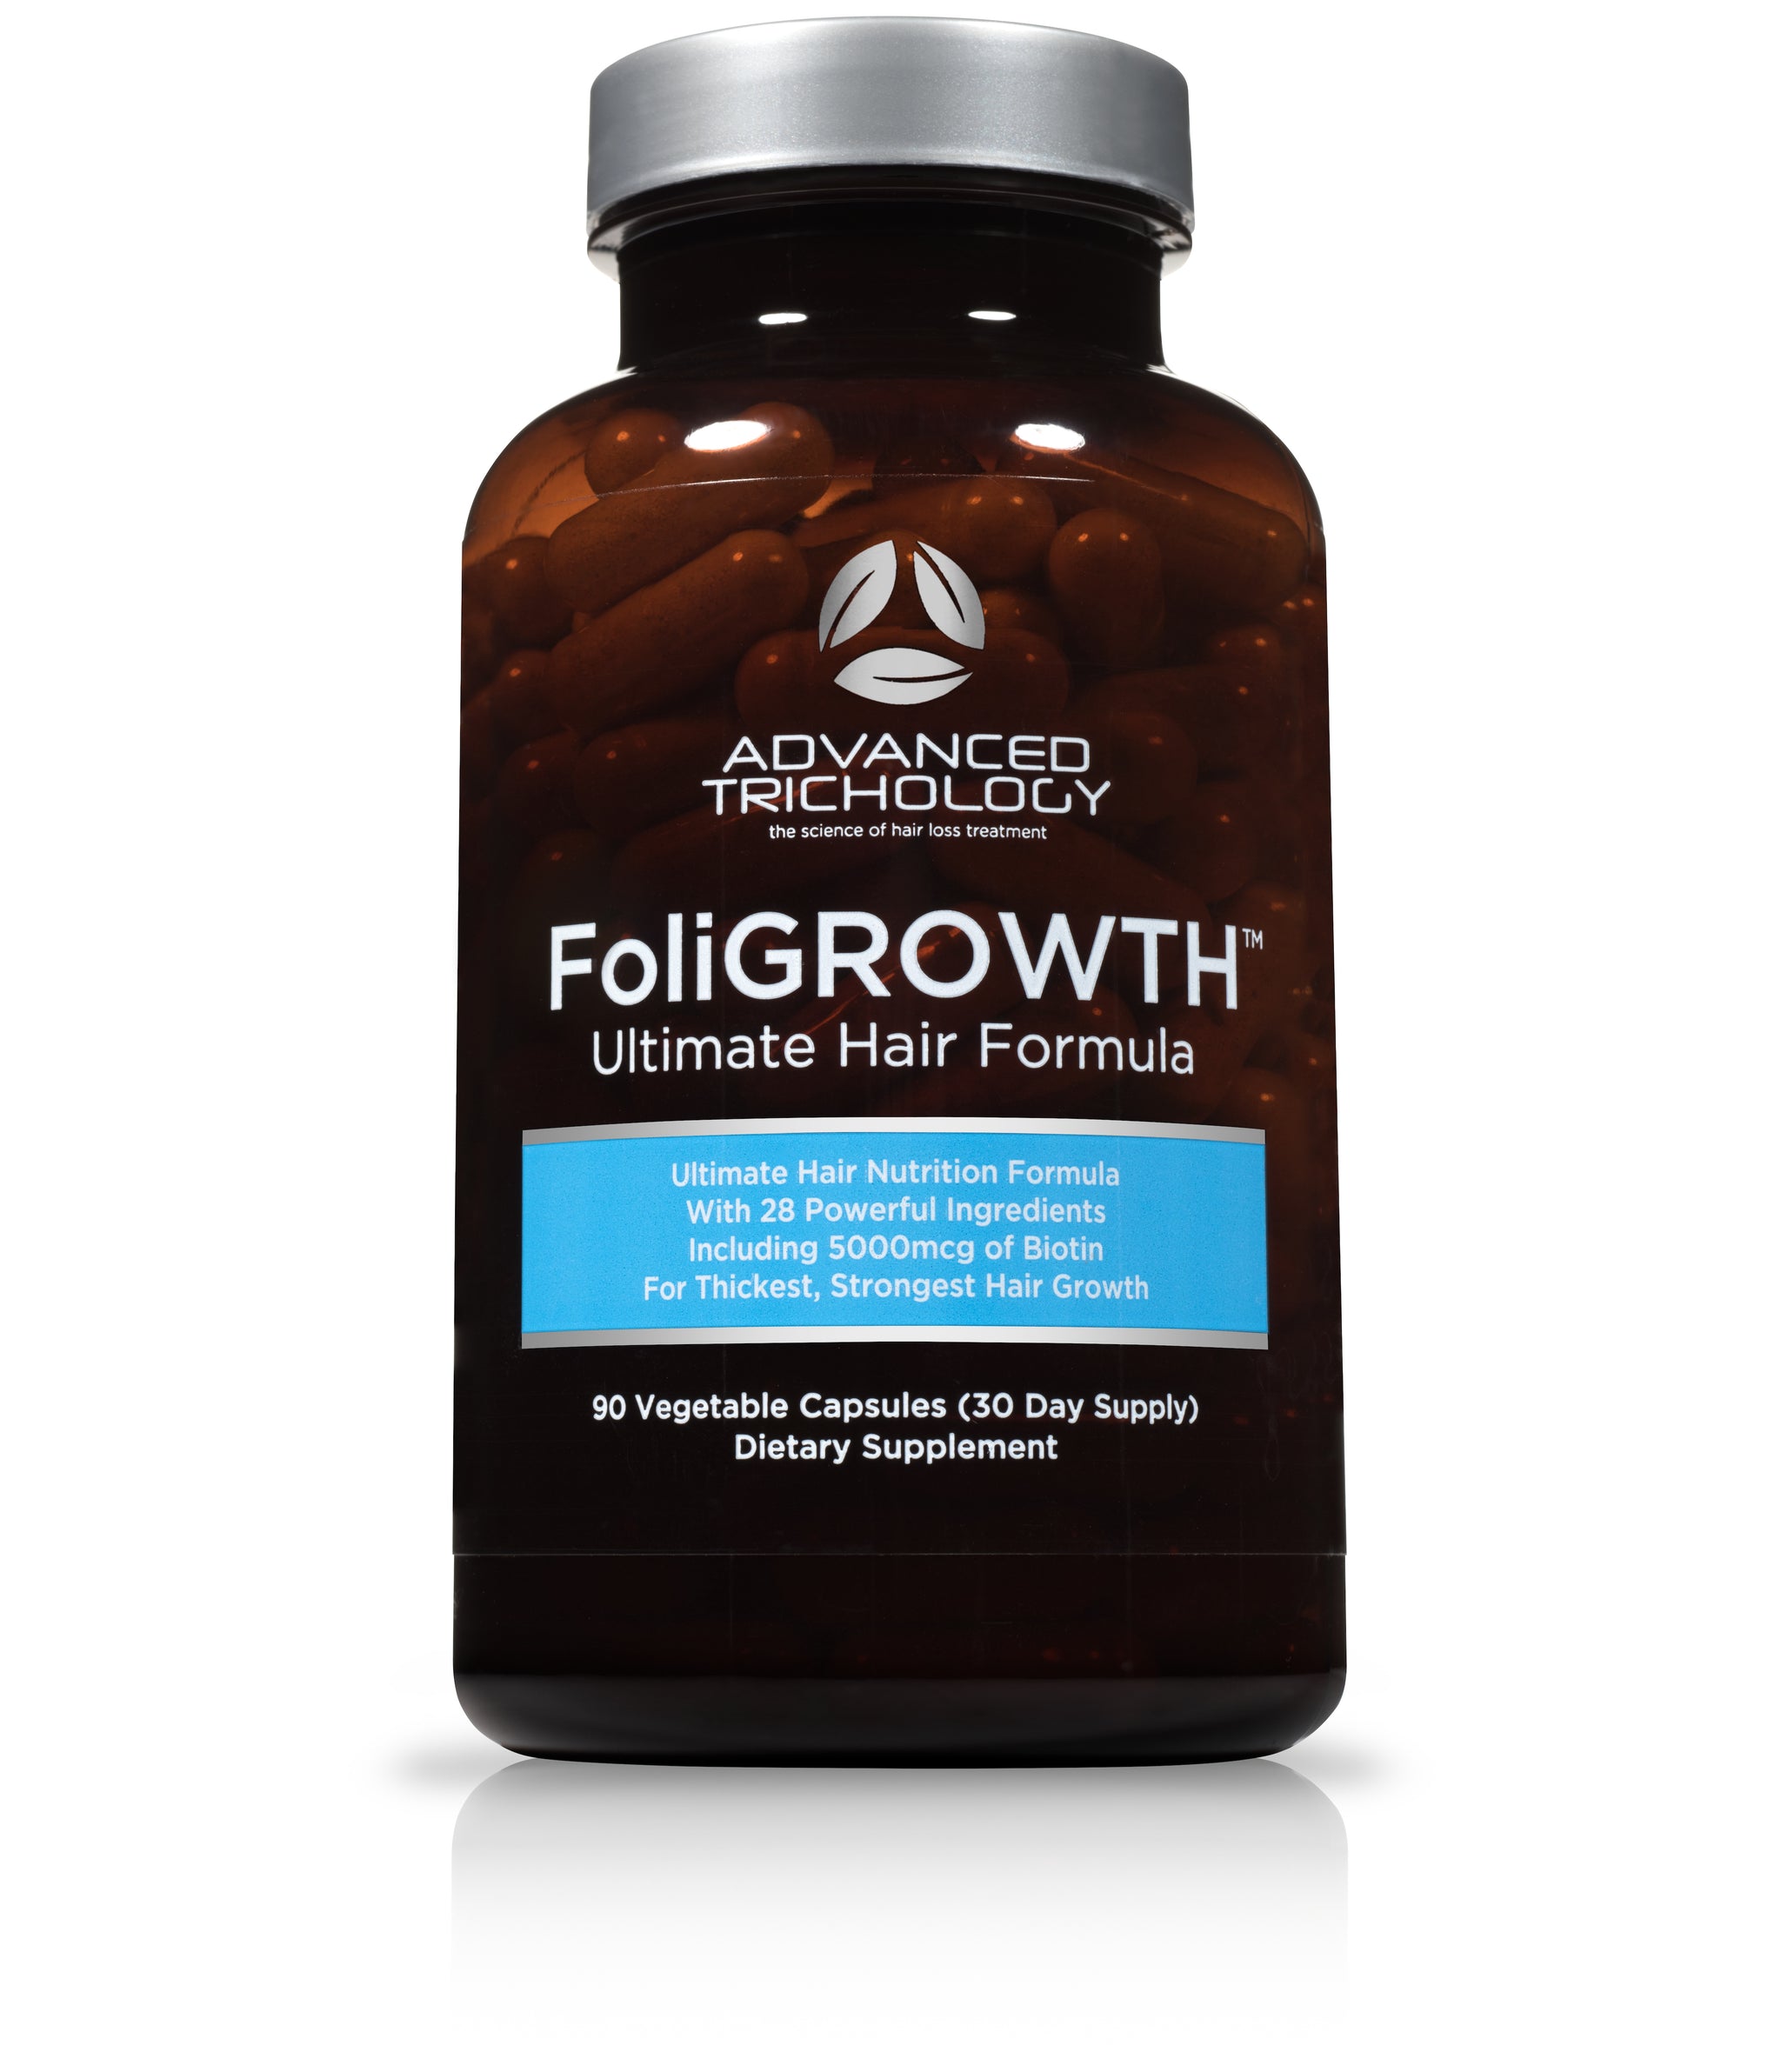 THANK YOU FoliGROWTH Ultra Hair Growth Vitamin With High Potency